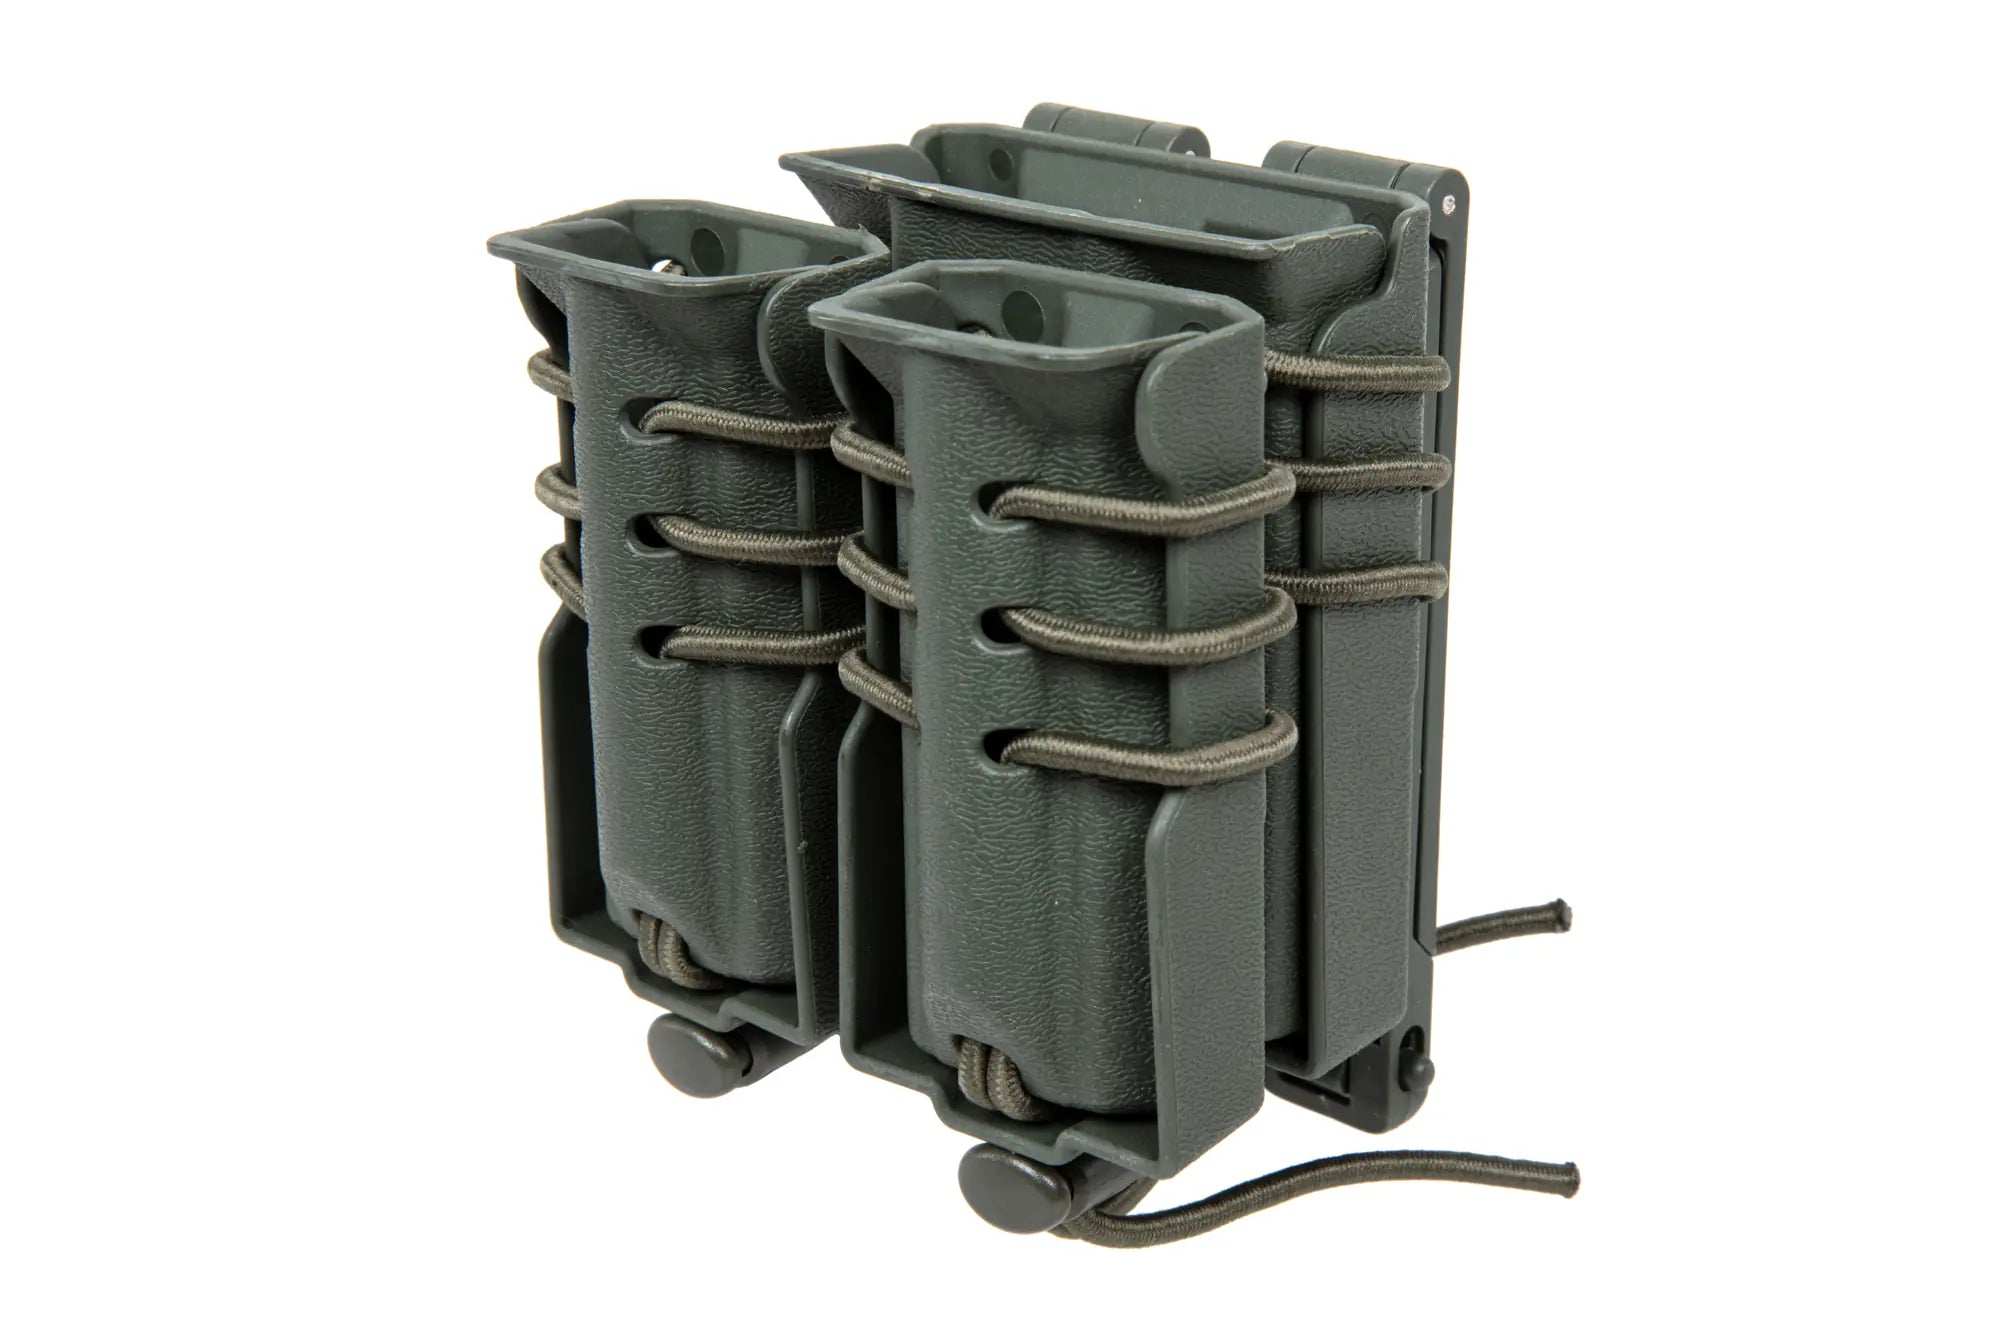 Carrier for 2 9mm magazines and an M4/M16 magazine Wosport Urban Assault Quick Pull Olive-2